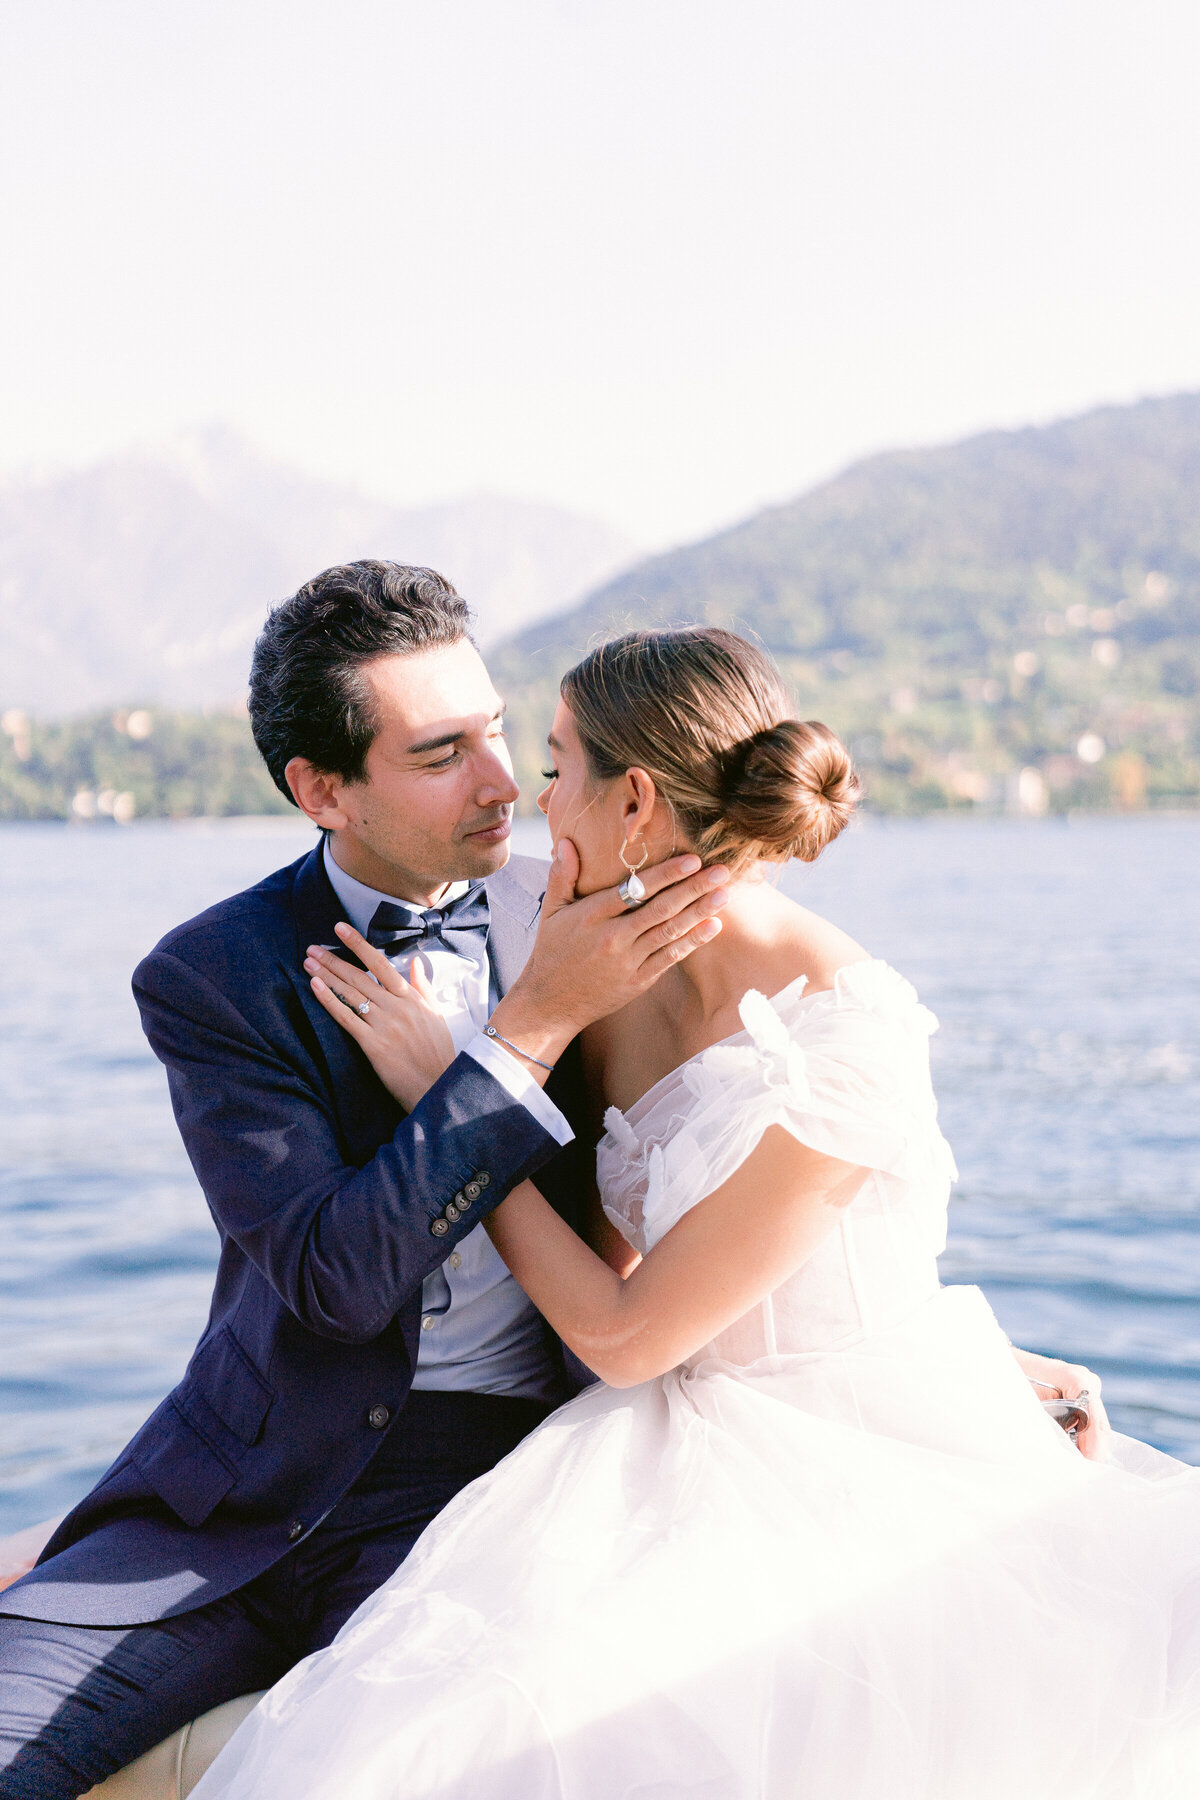 Couple in an embrace on board a private boat on Lake Como, Italy